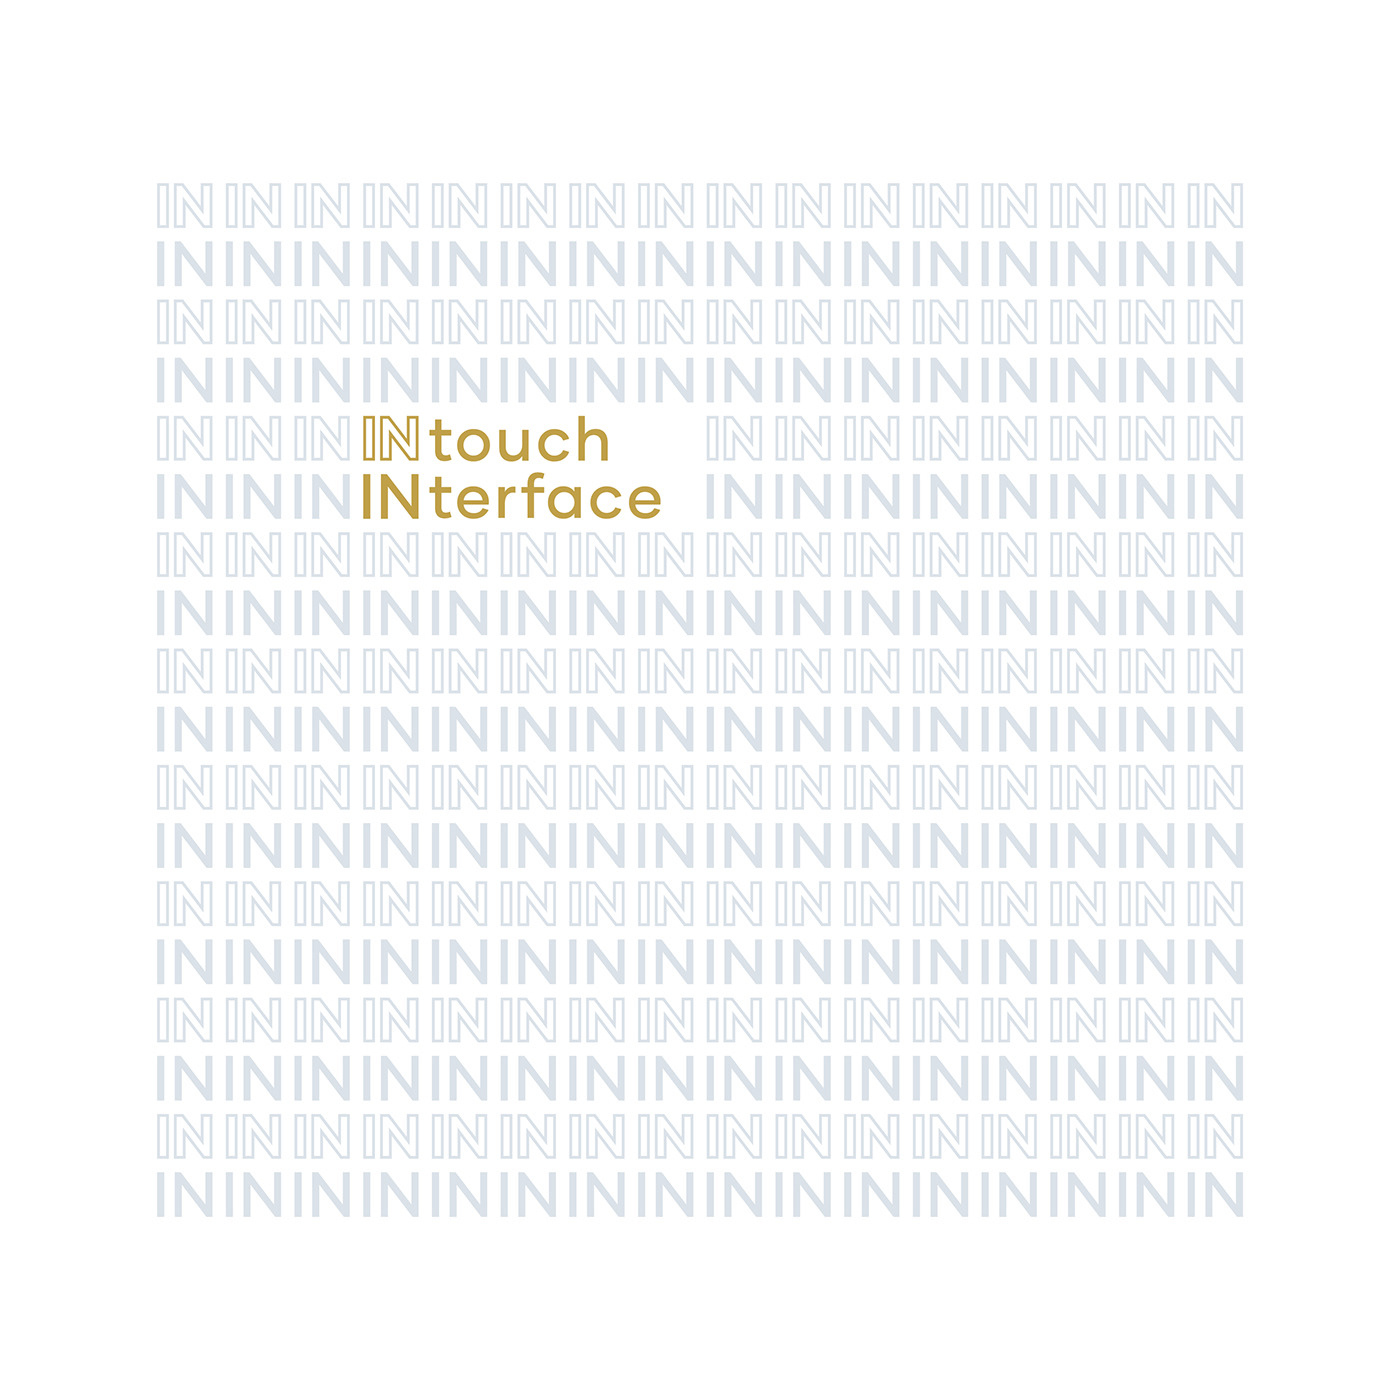 Intouch Interface pattern design by Mustard Design Co.